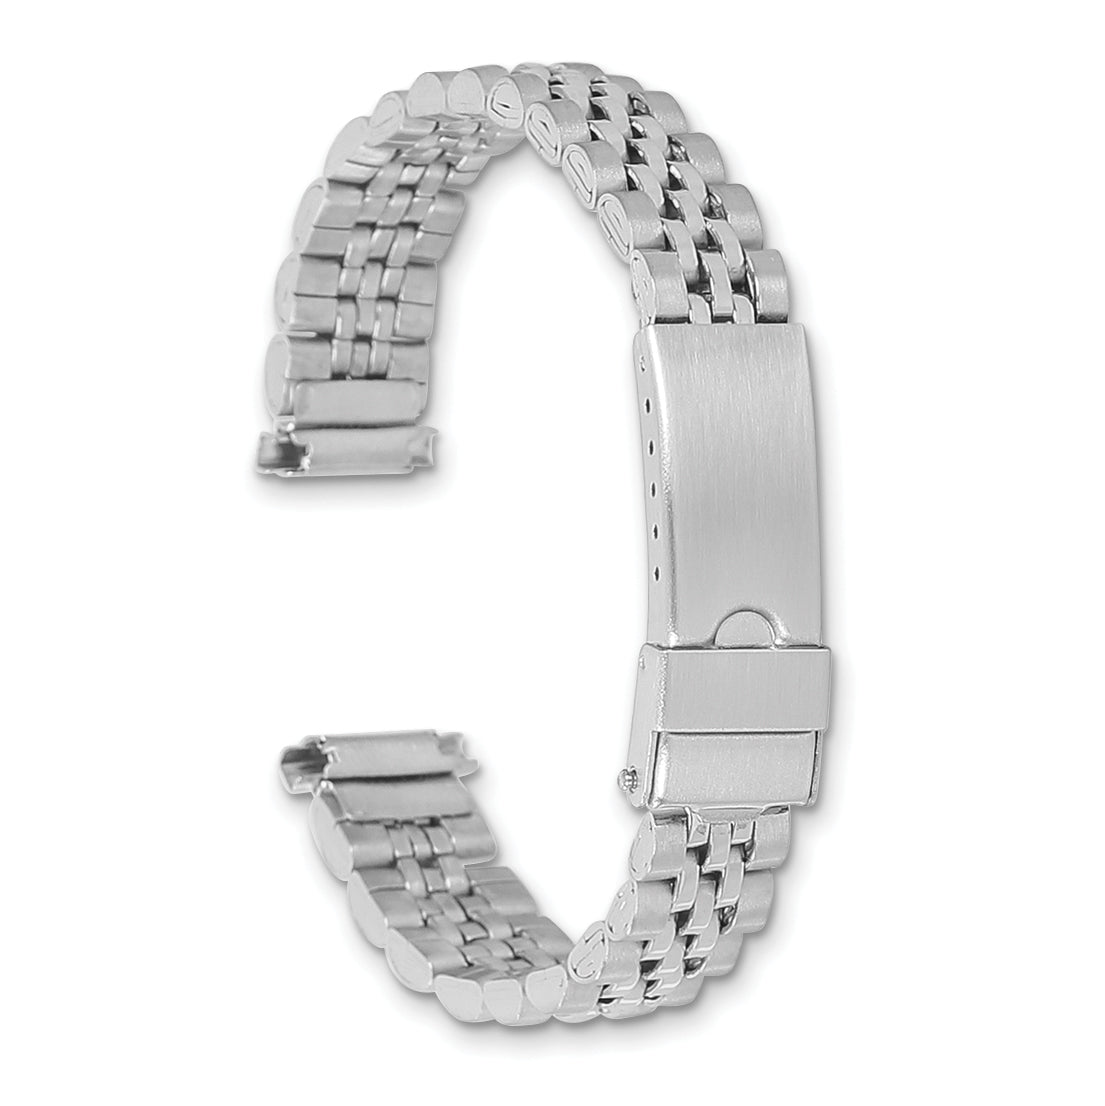 12-15mm Ladies Satin and Polished Stainless Steel Jubilee-Style with Deployment Buckle 7 inch Watch Band